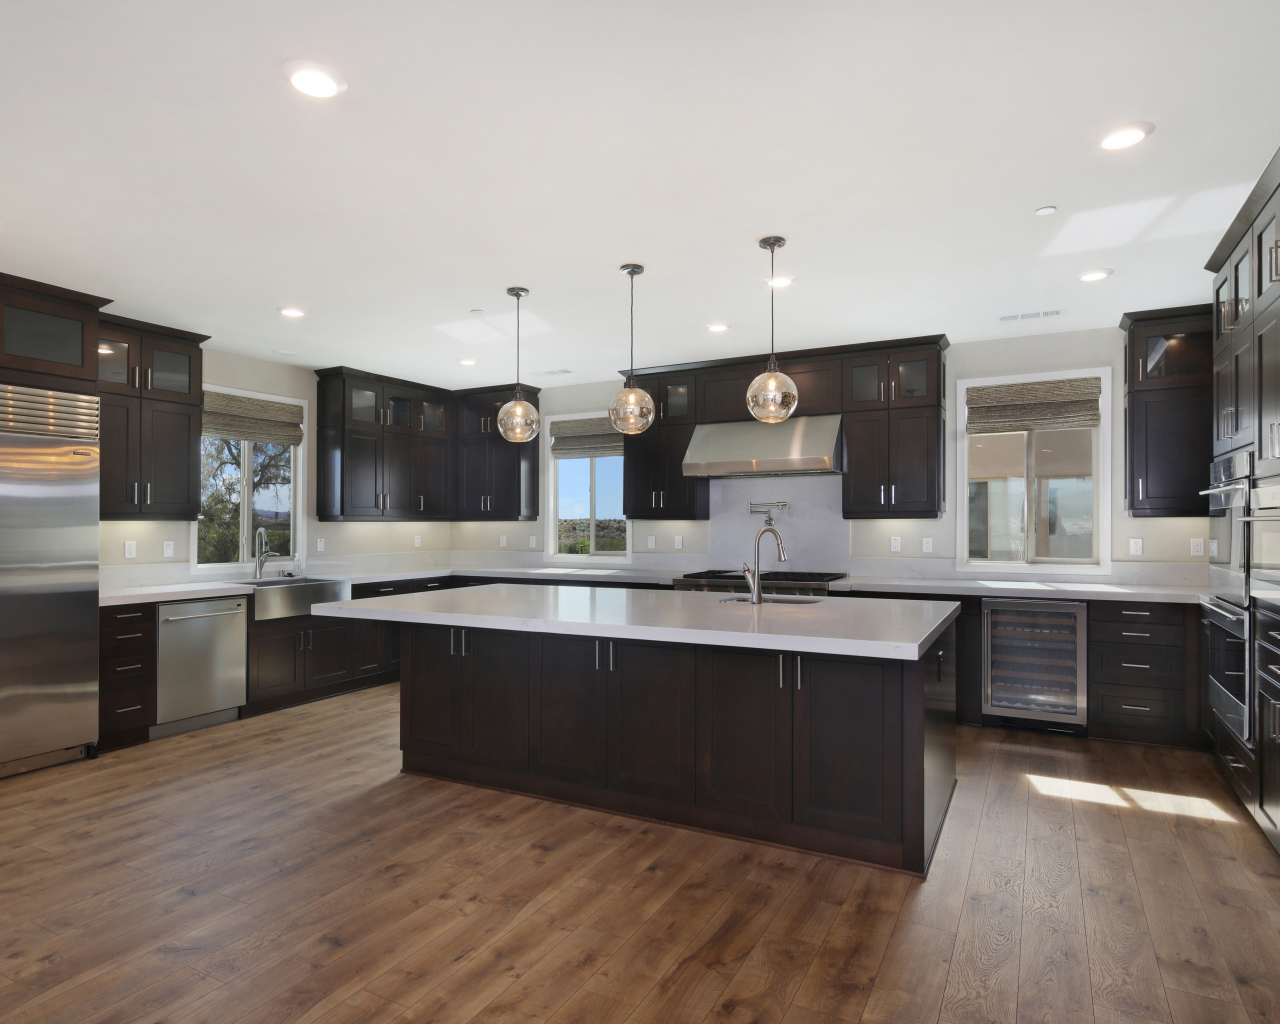 Large spacious kitchen with brown furniture.